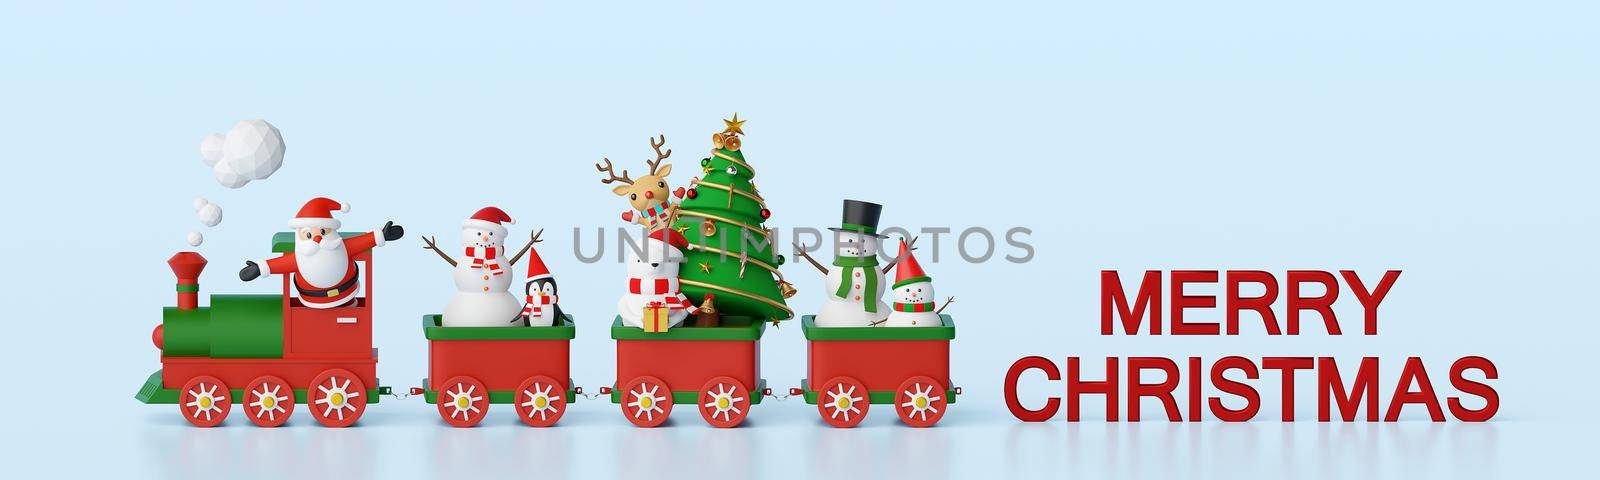 Merry Christmas and Happy New Year, Banner background of Santa Claus and friends on Christmas train, 3d rendering